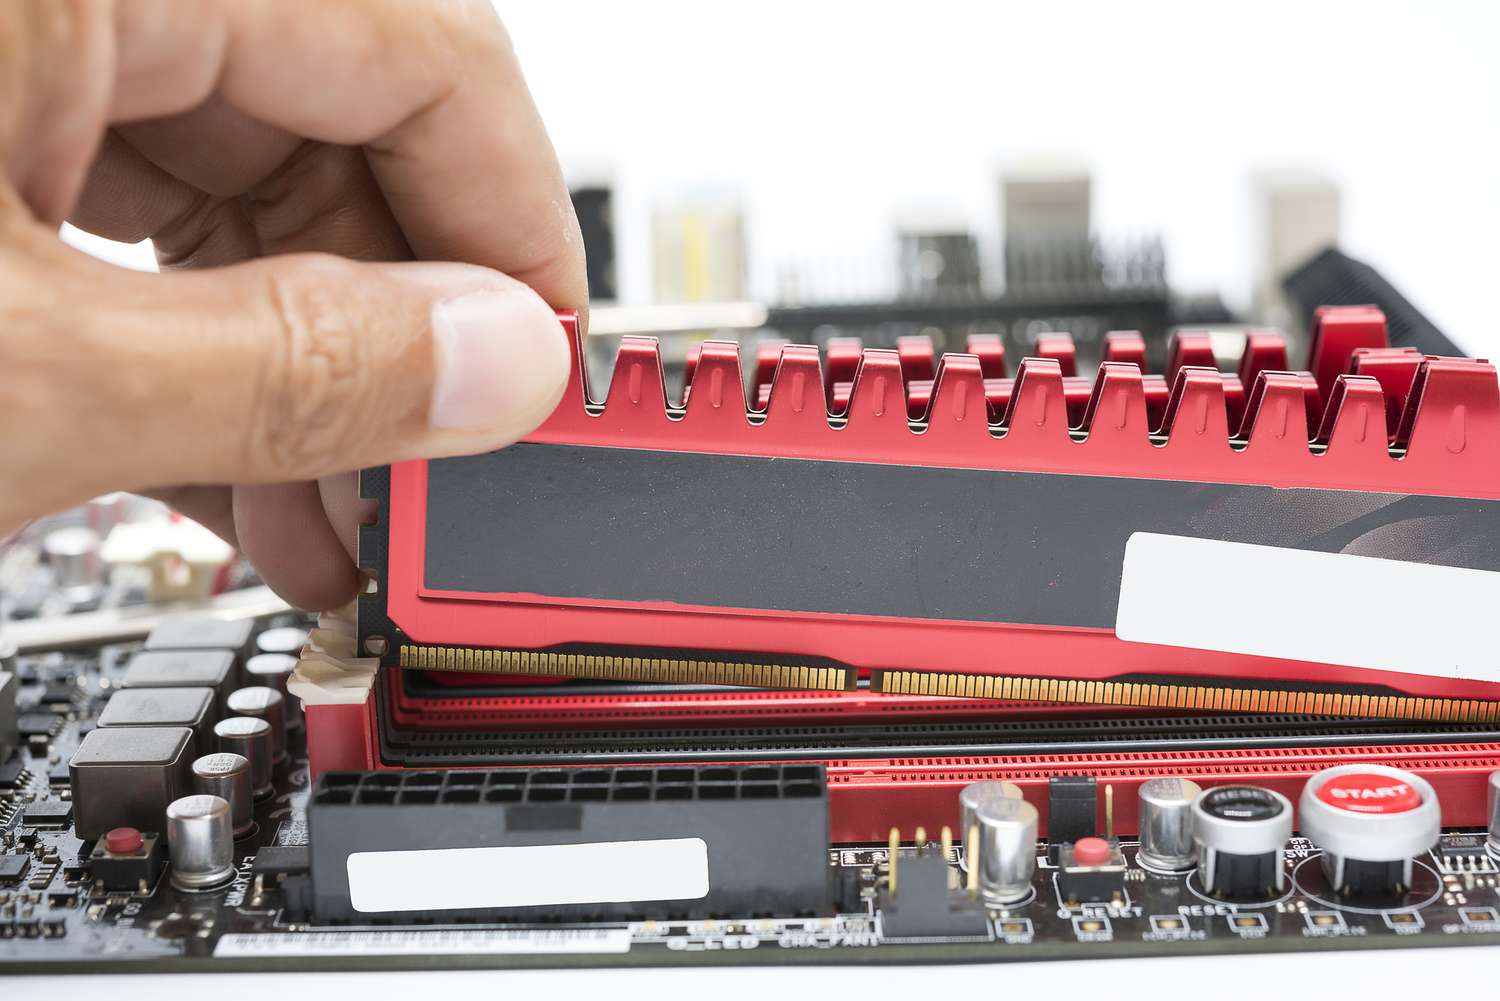 how-to-know-if-a-ram-is-compatible-with-my-pc